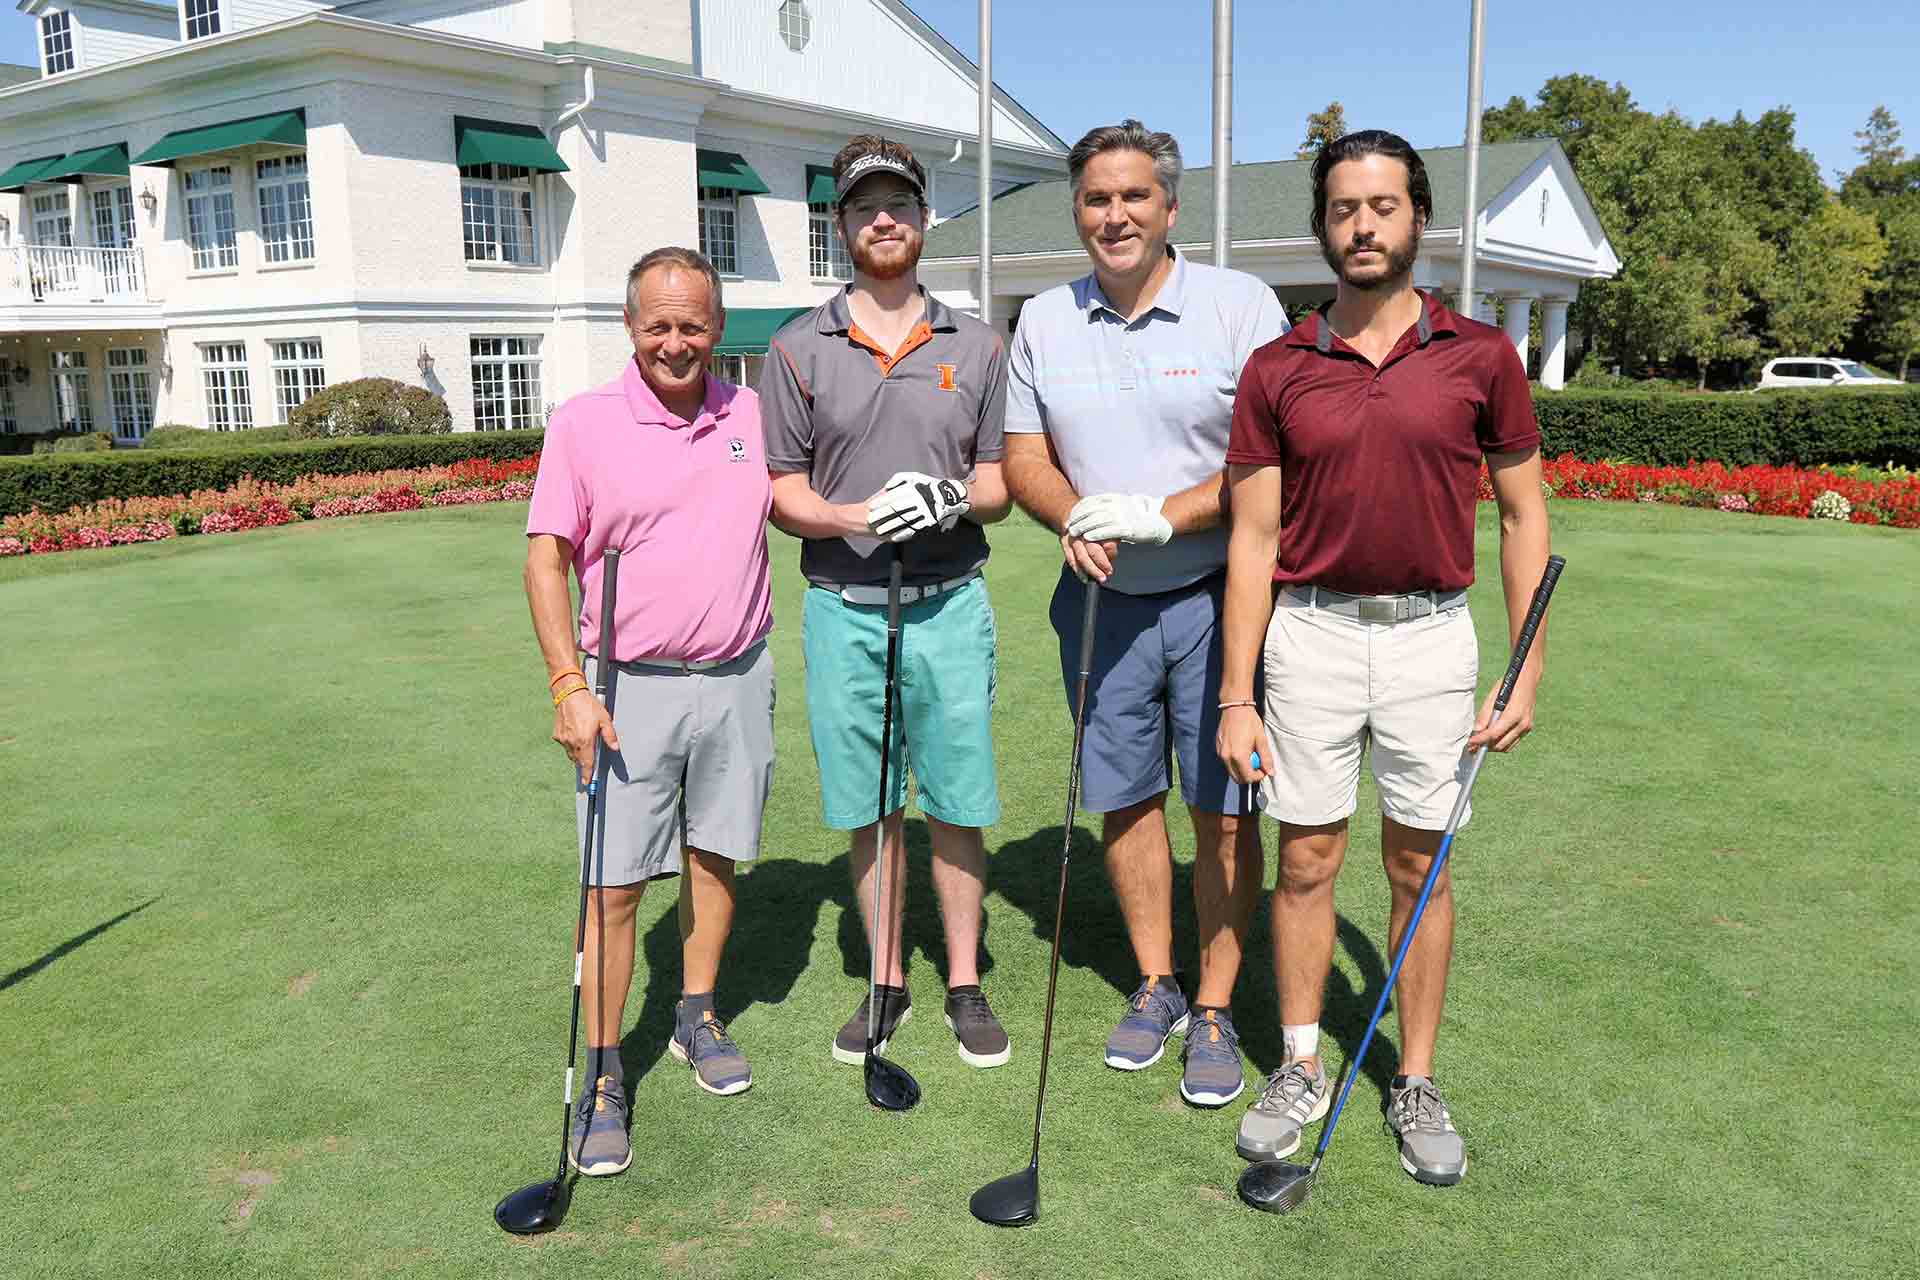 2021-endowment-classic-group-of-golfers-together